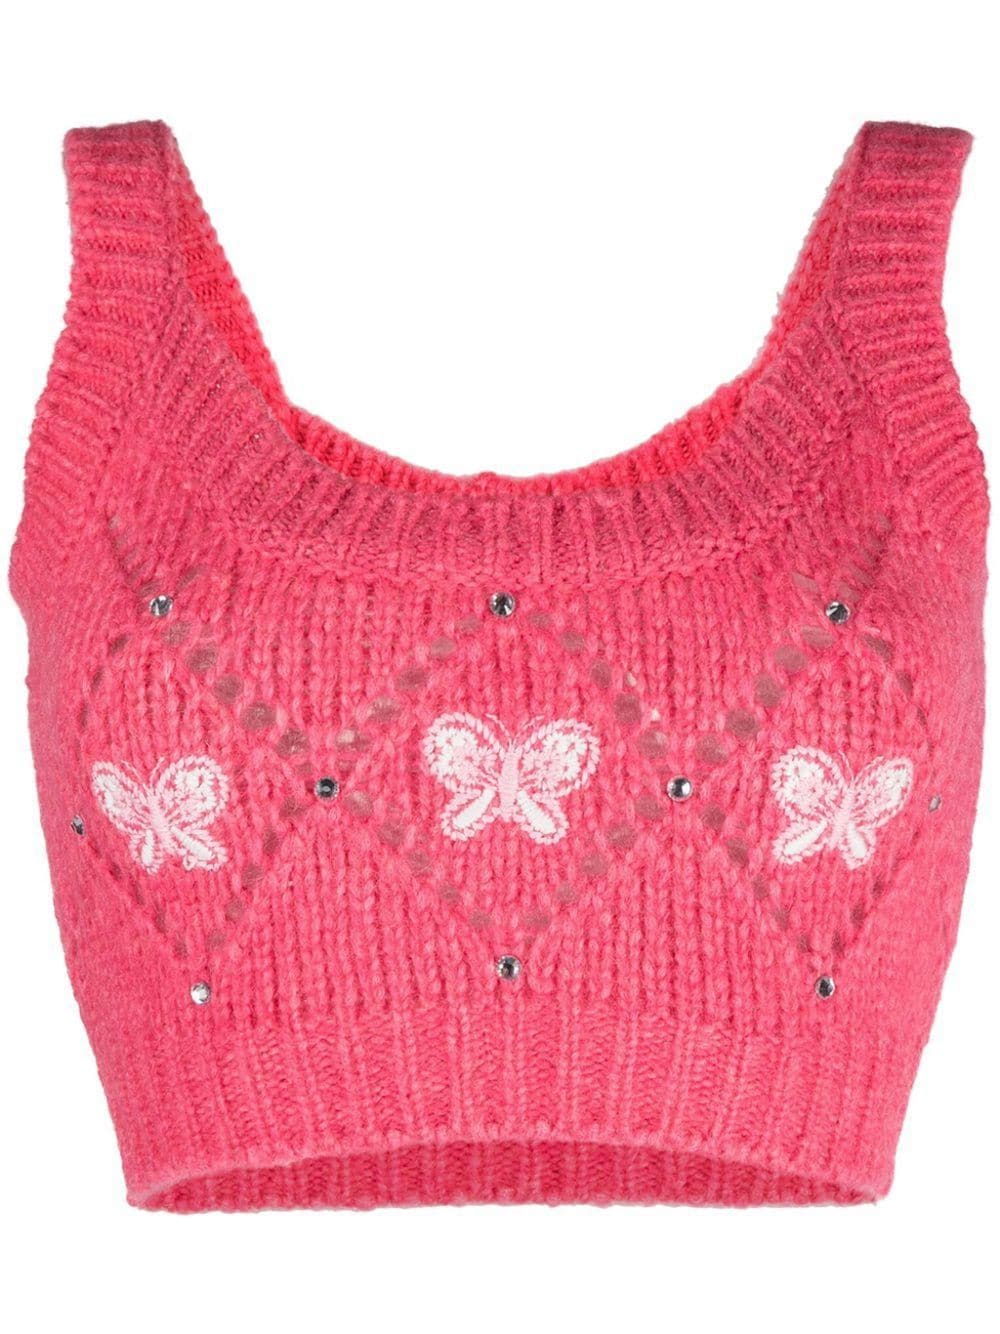 Alessandra Rich sleeveless knitted top